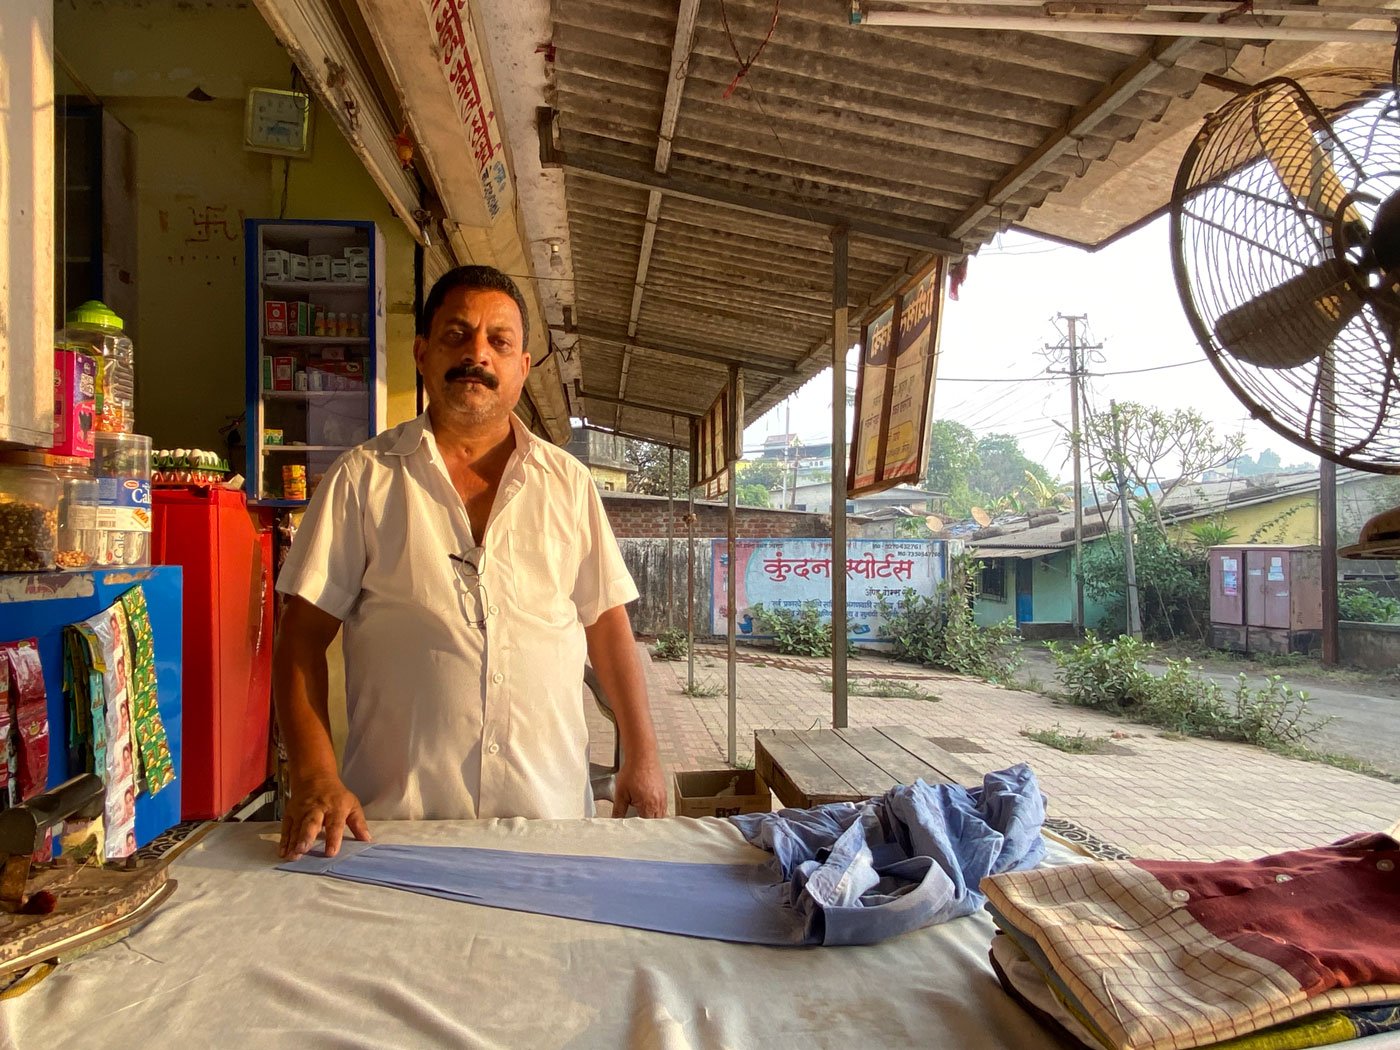 For families in Vada town of Palghar district who make a living by ironing clothes, the Covid-19 lockdown has reduced  daily incomes to a trickle. Many are struggling to procure rations and seeking other work